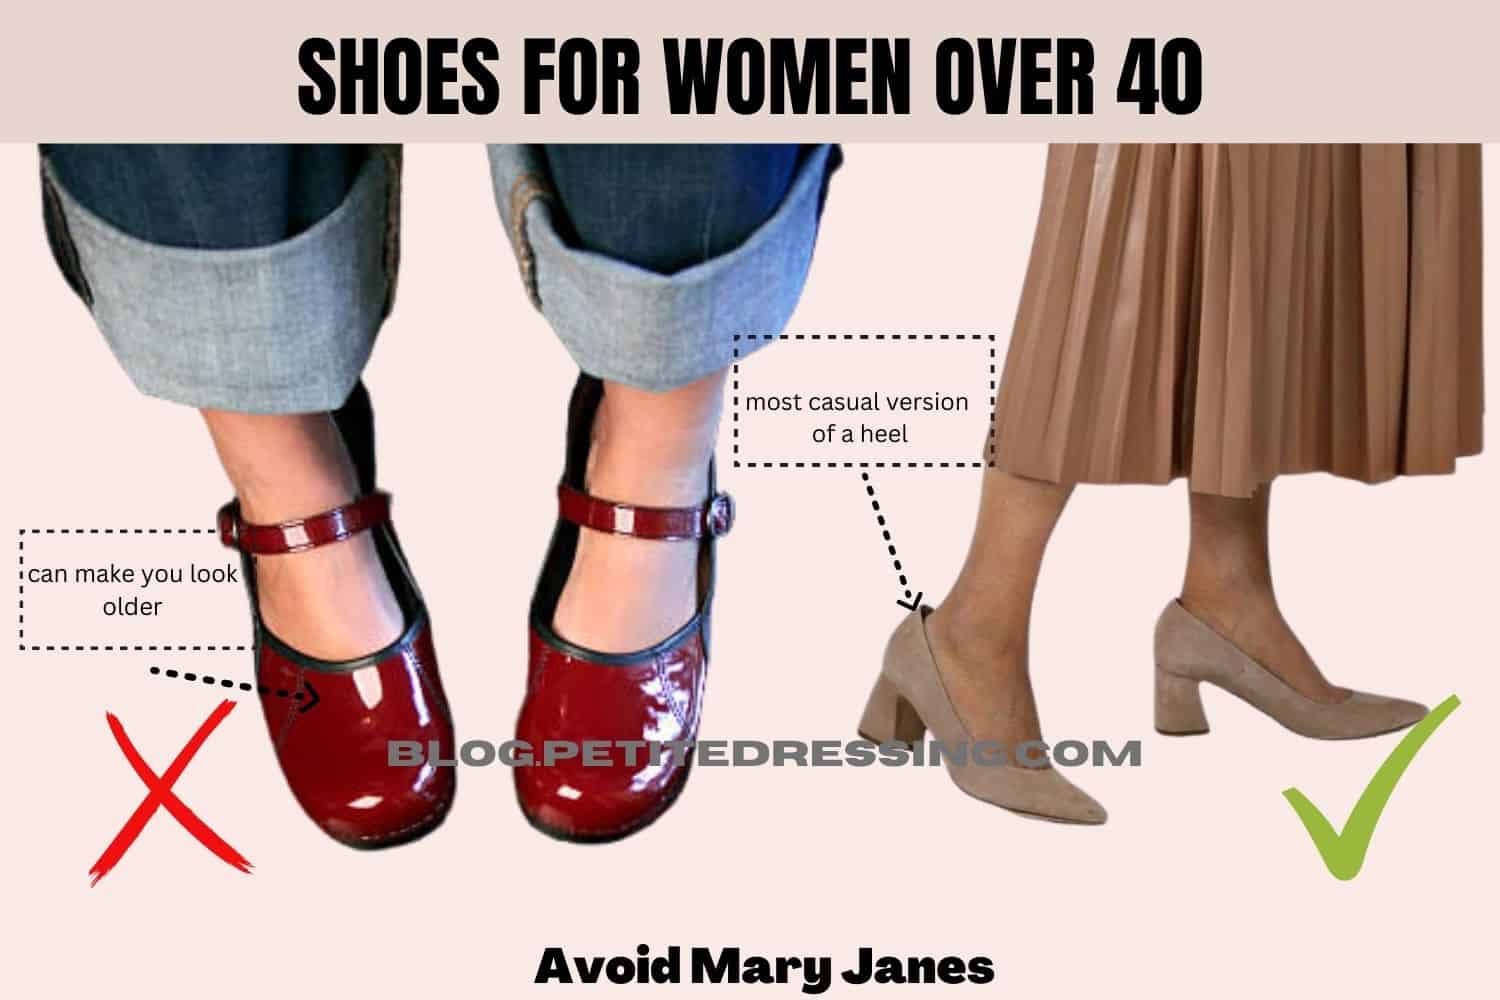 Shoes for Women Over 40